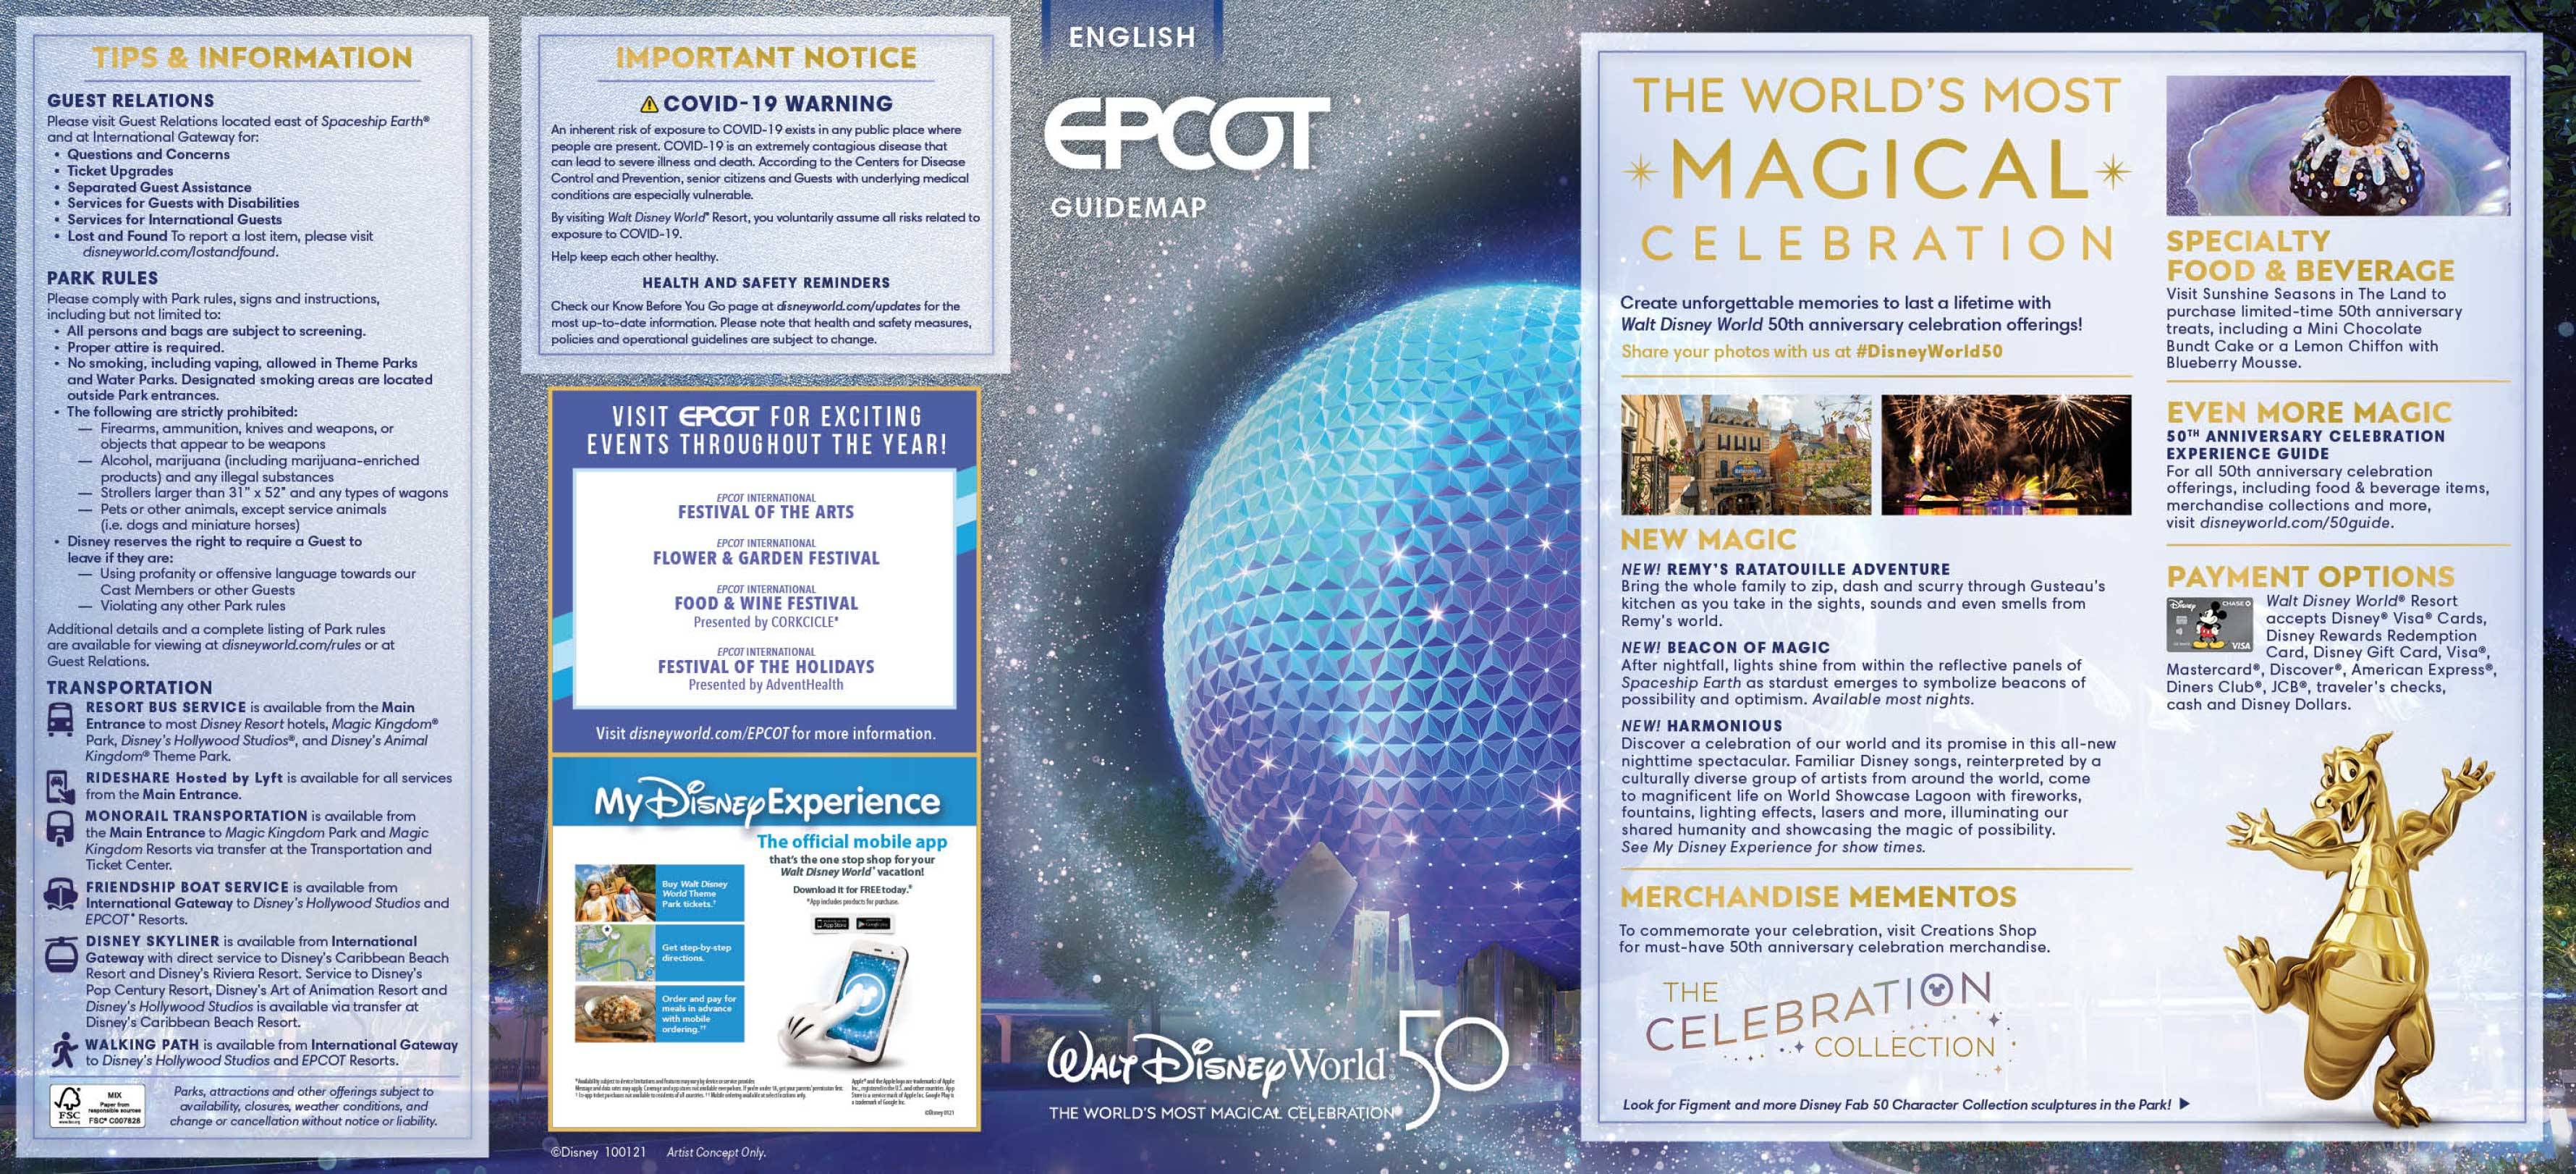 EPCOT guide map featuring new neighborhoods